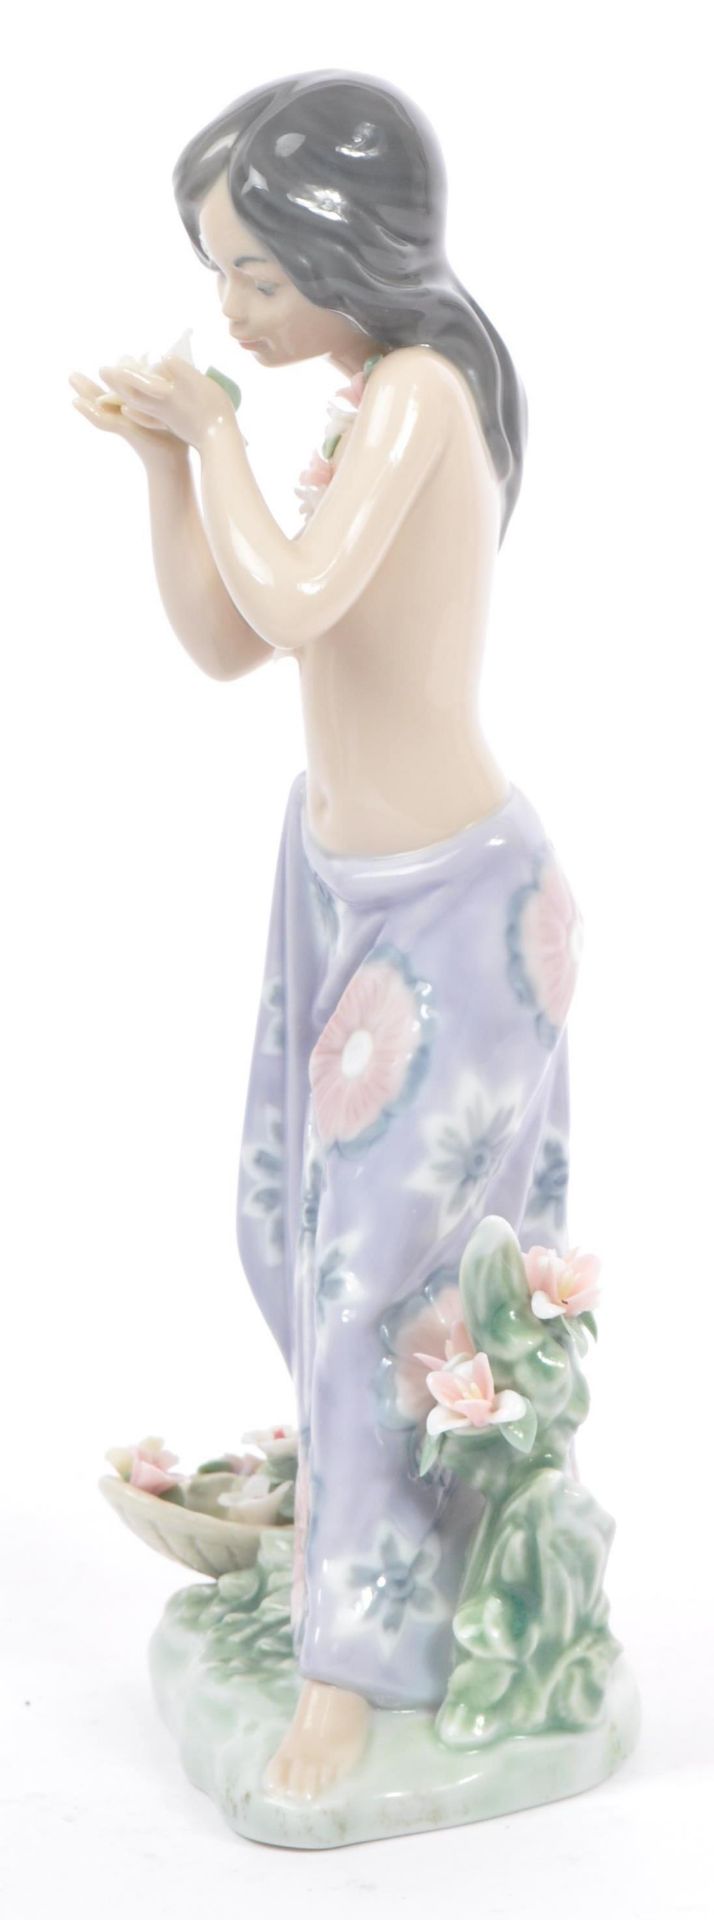 LLADRO - AROMA OF THE ISLAND - 20TH CENTURY PORCELAIN FIGURE - Image 4 of 9